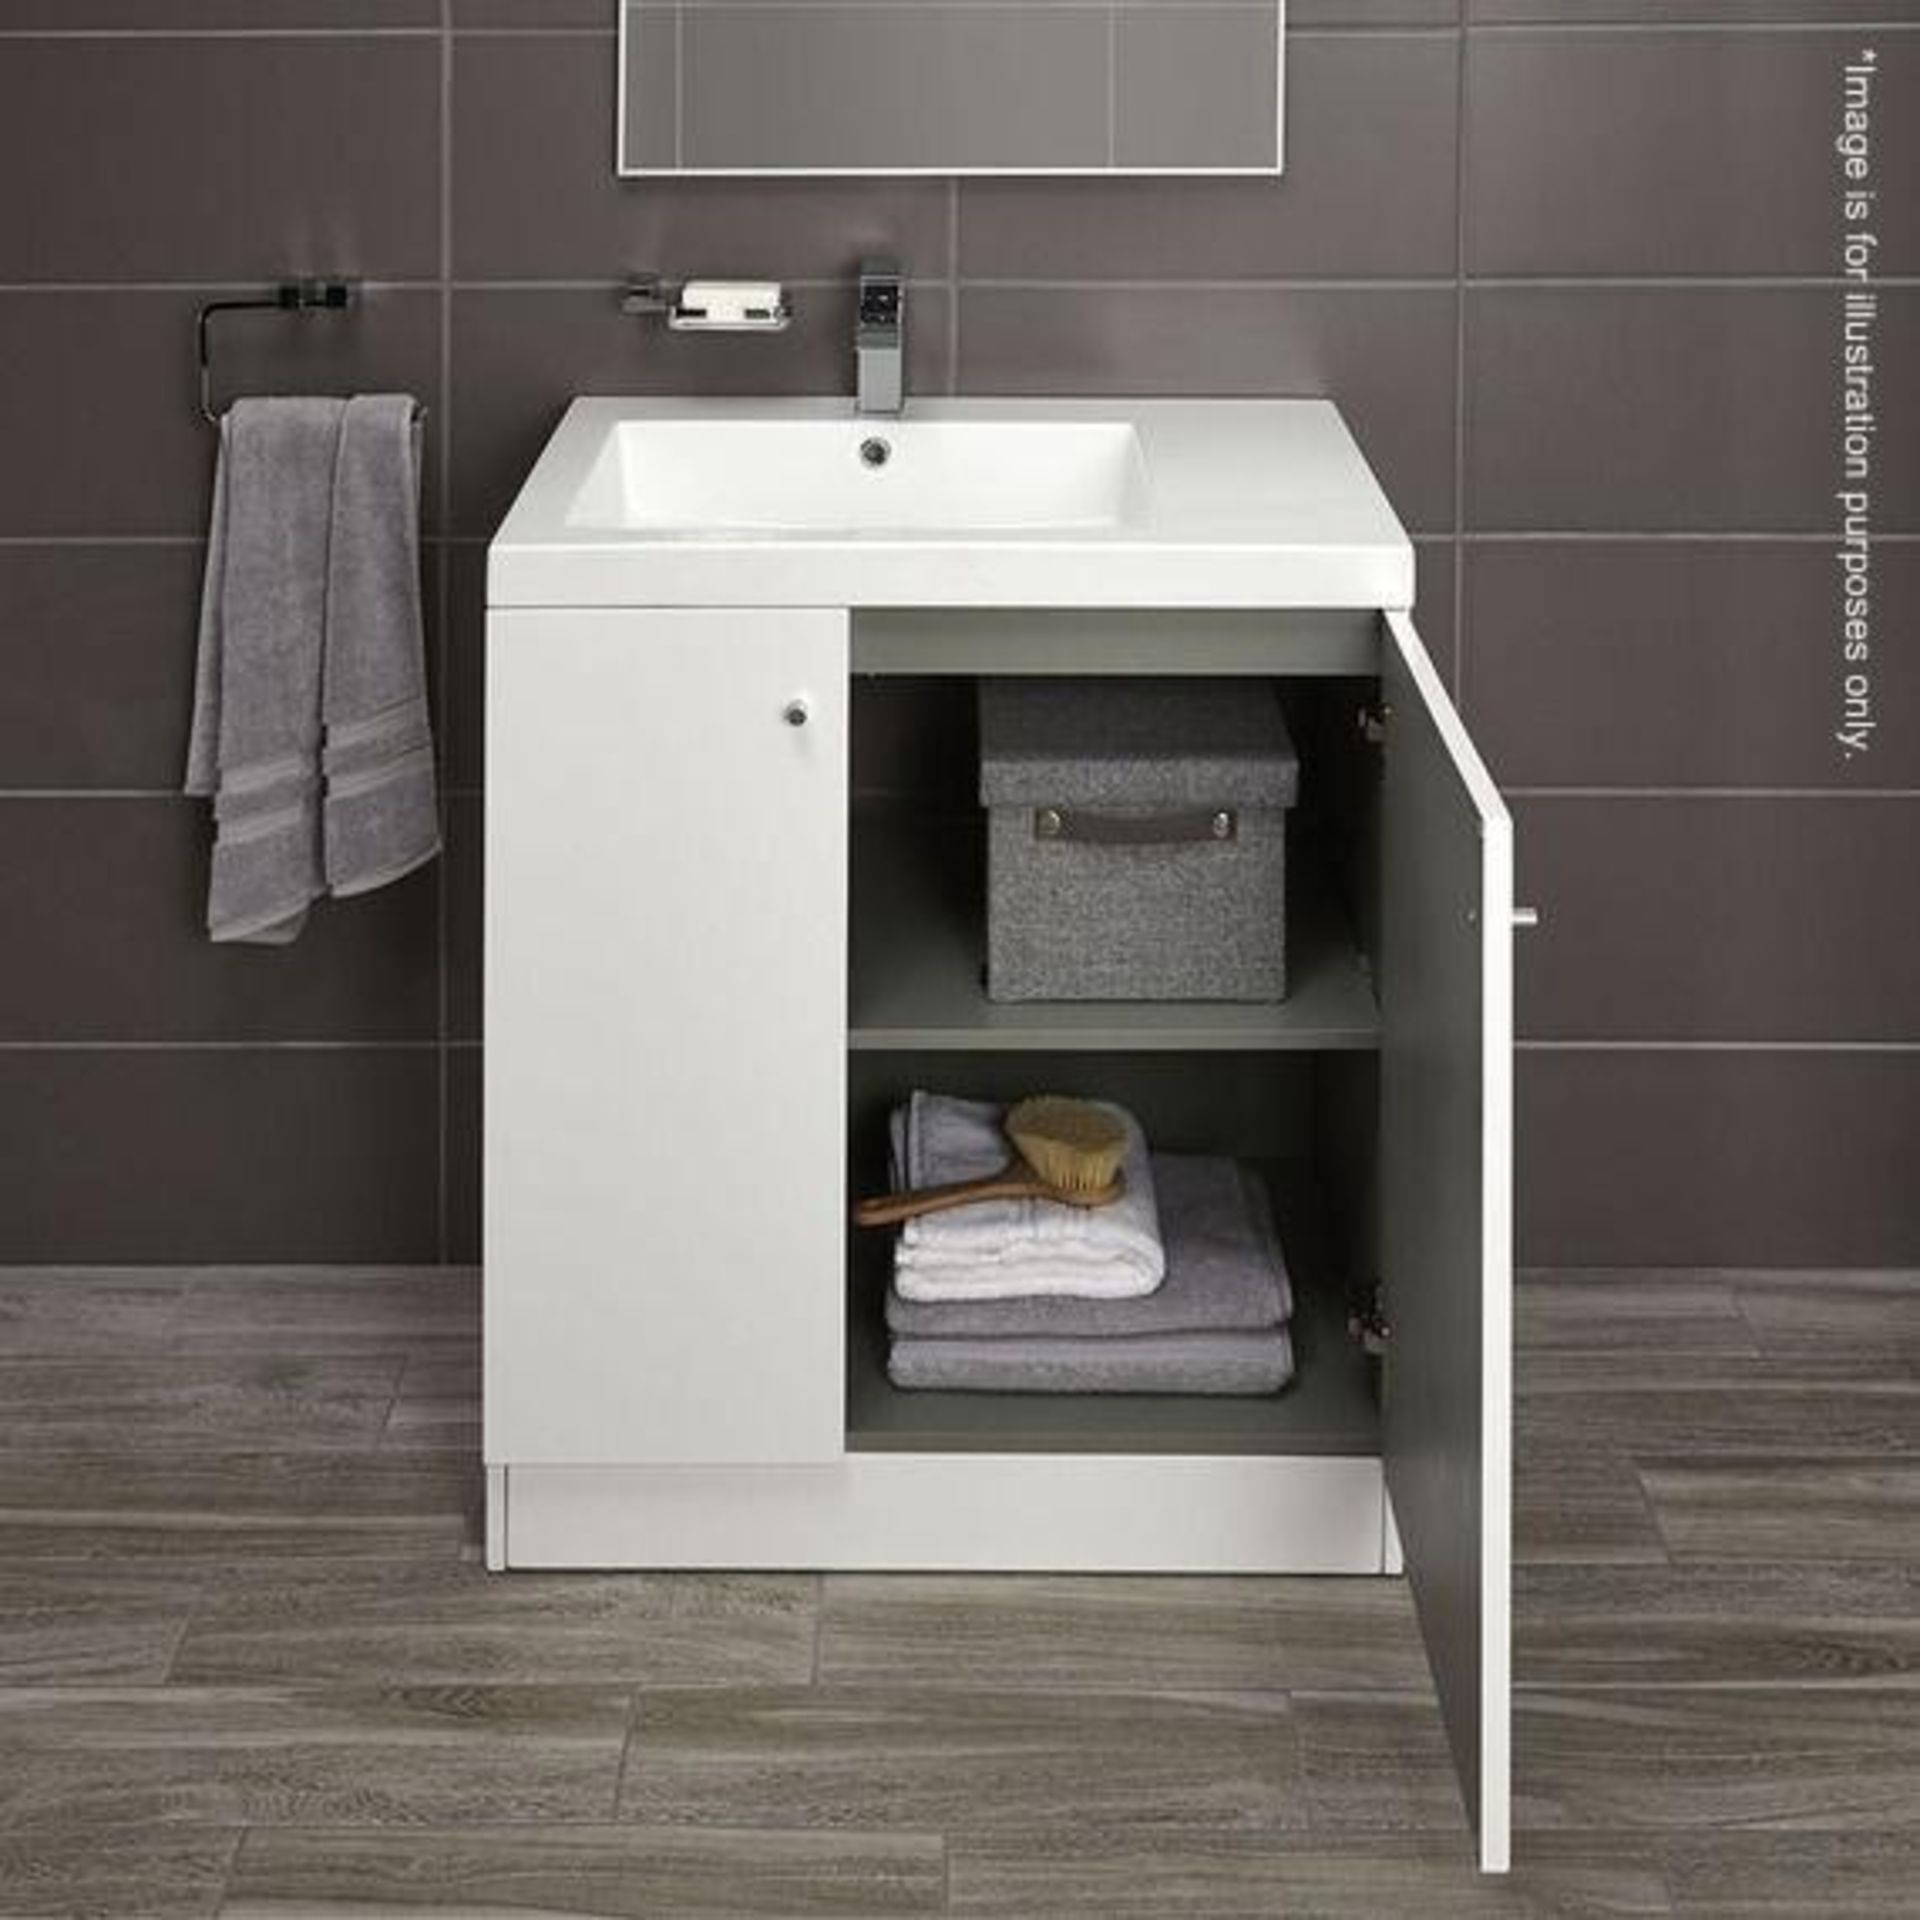 10 x Alpine Duo 750 Floorstanding Vanity Units In Gloss White - Dimensions: H80 x W75 x D49.5cm - - Image 4 of 4